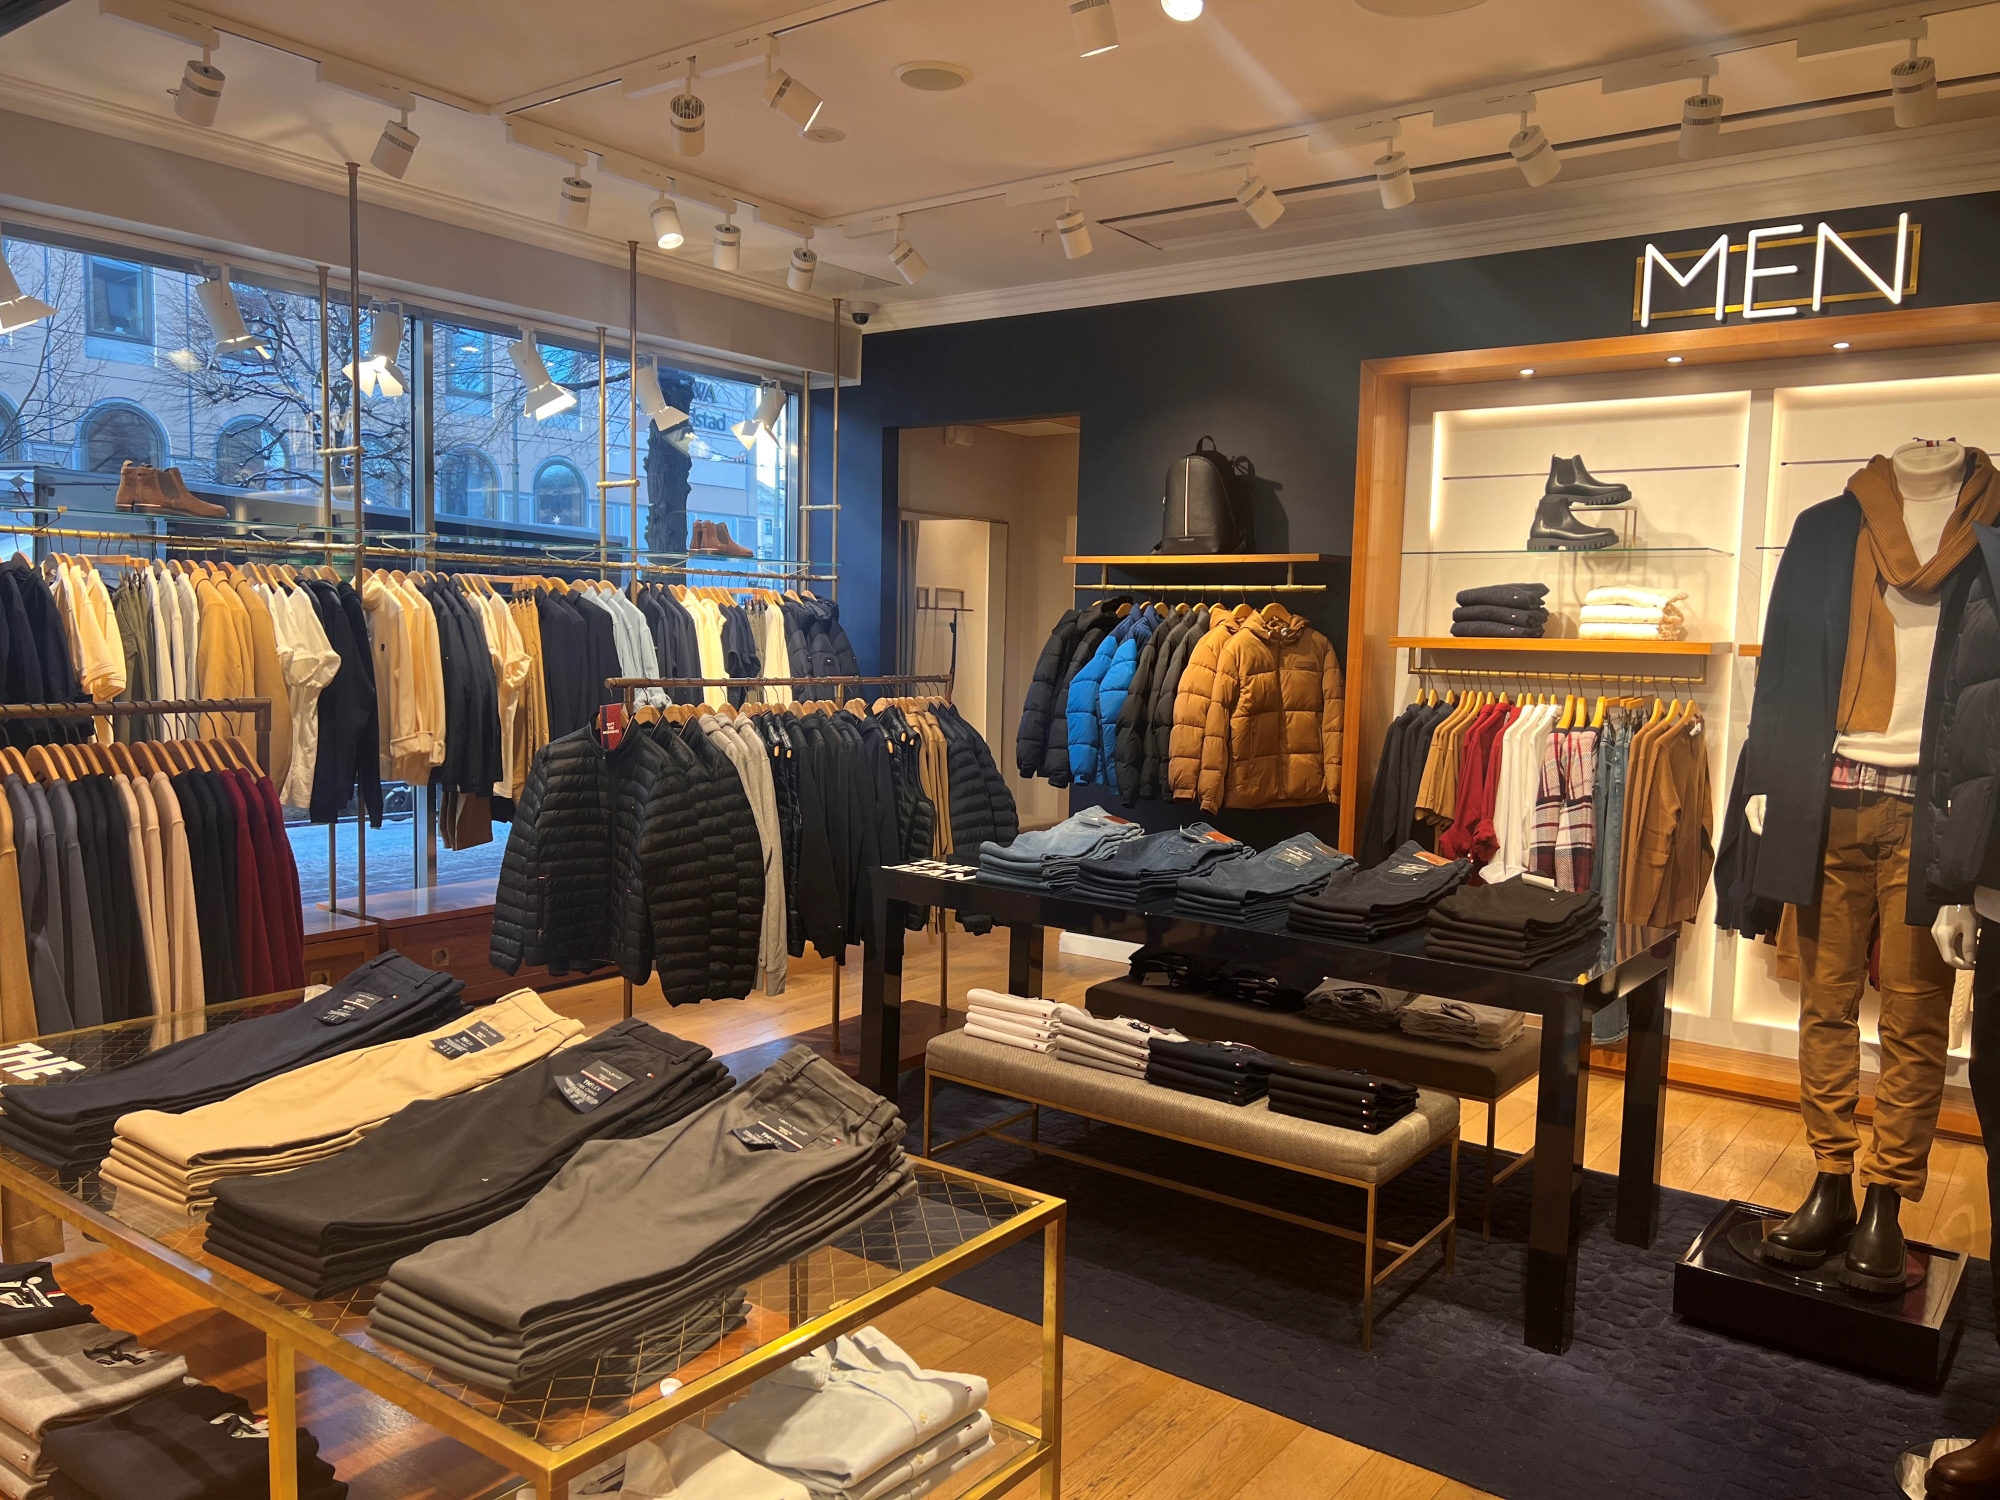 Inside of a clothing store where men clothes are displayed.